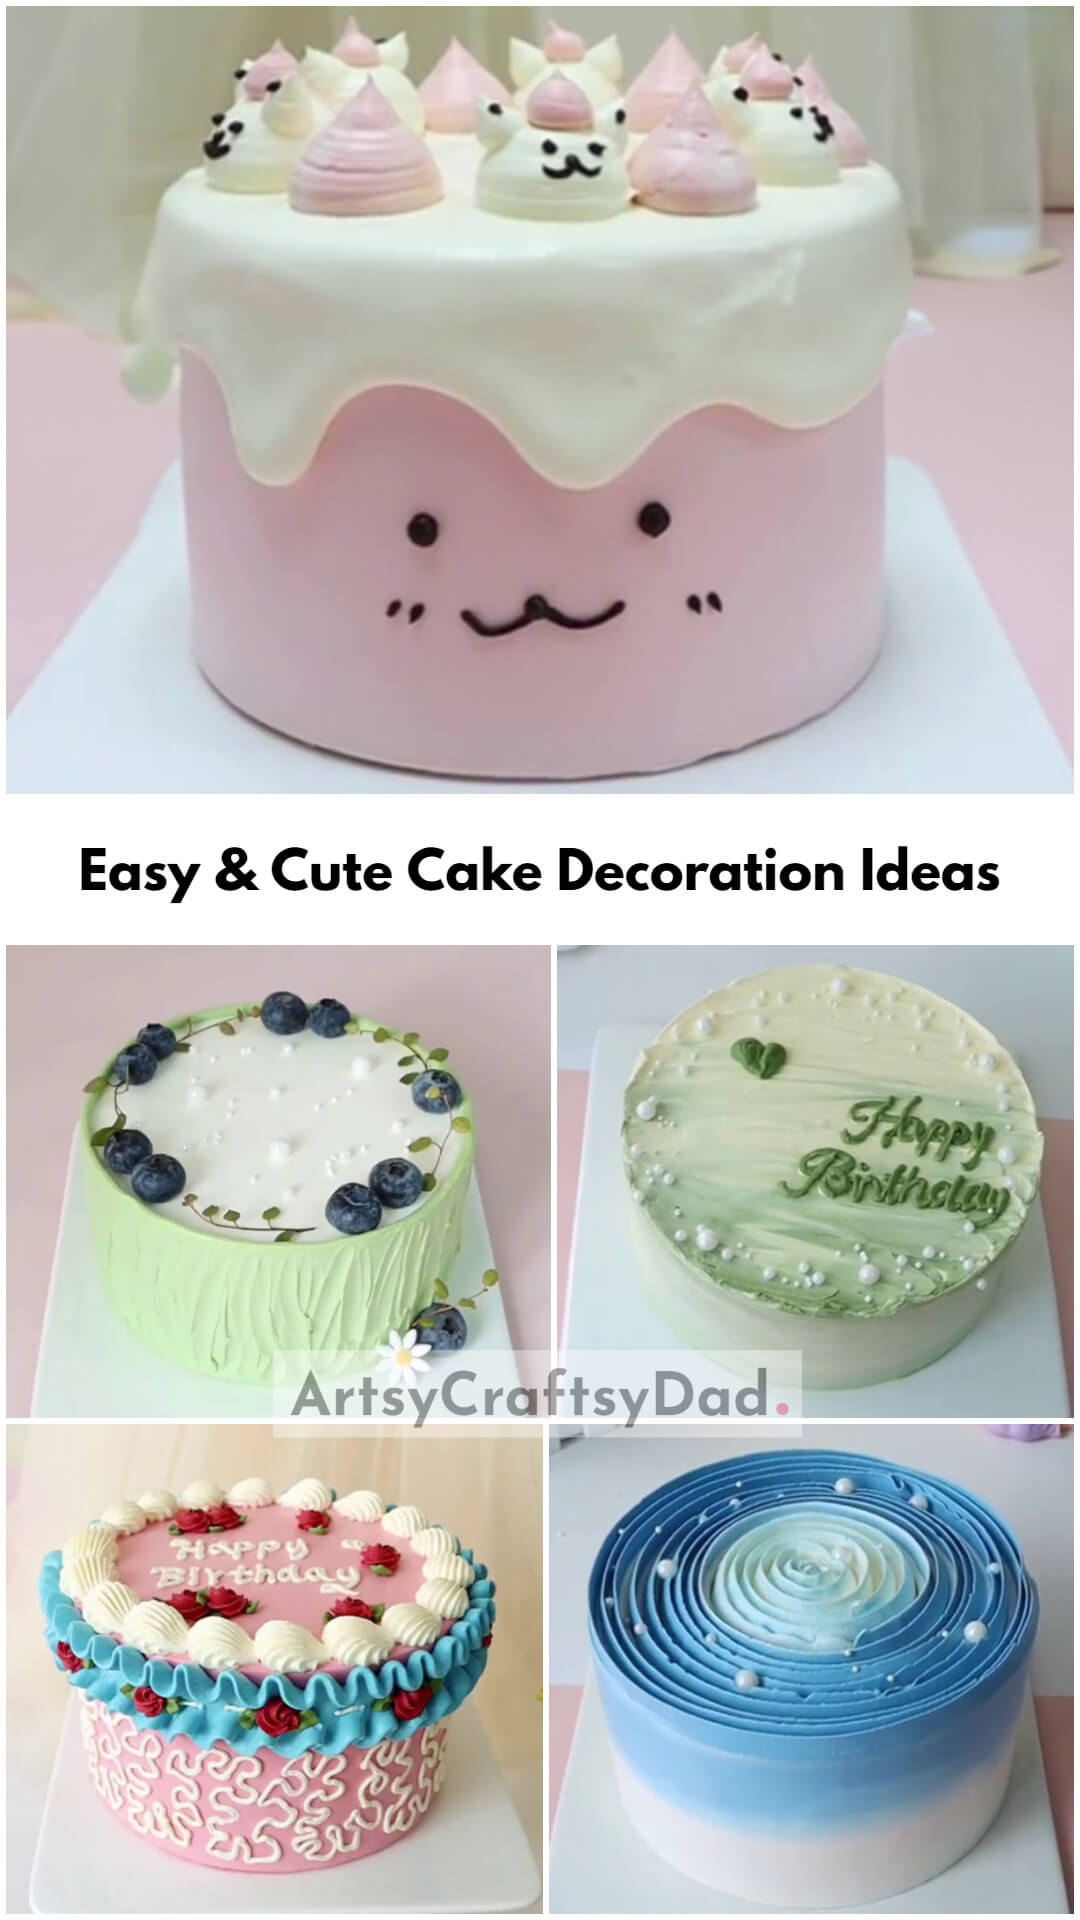  Easy & Cute Cake Decoration Ideas for Home Bakers